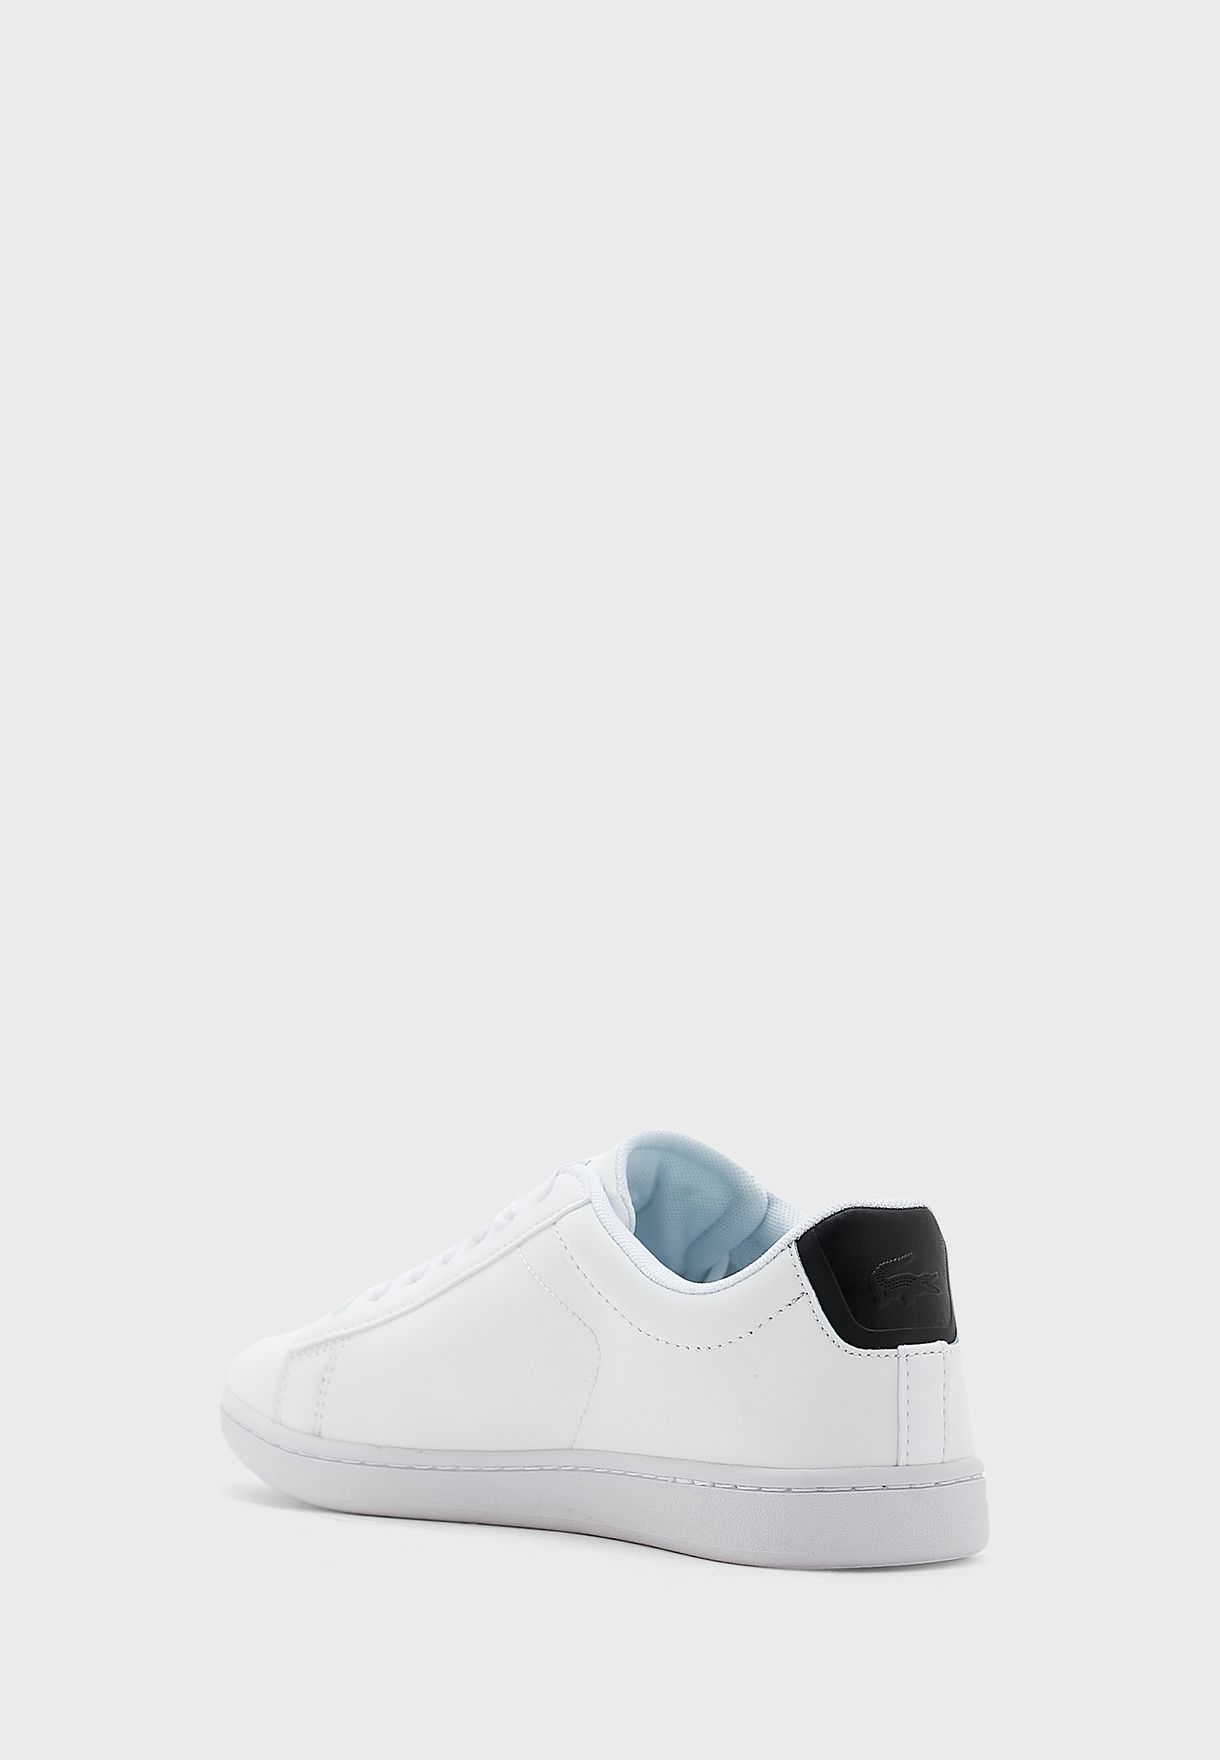 Carnaby Evo 0121 2 Sneakers